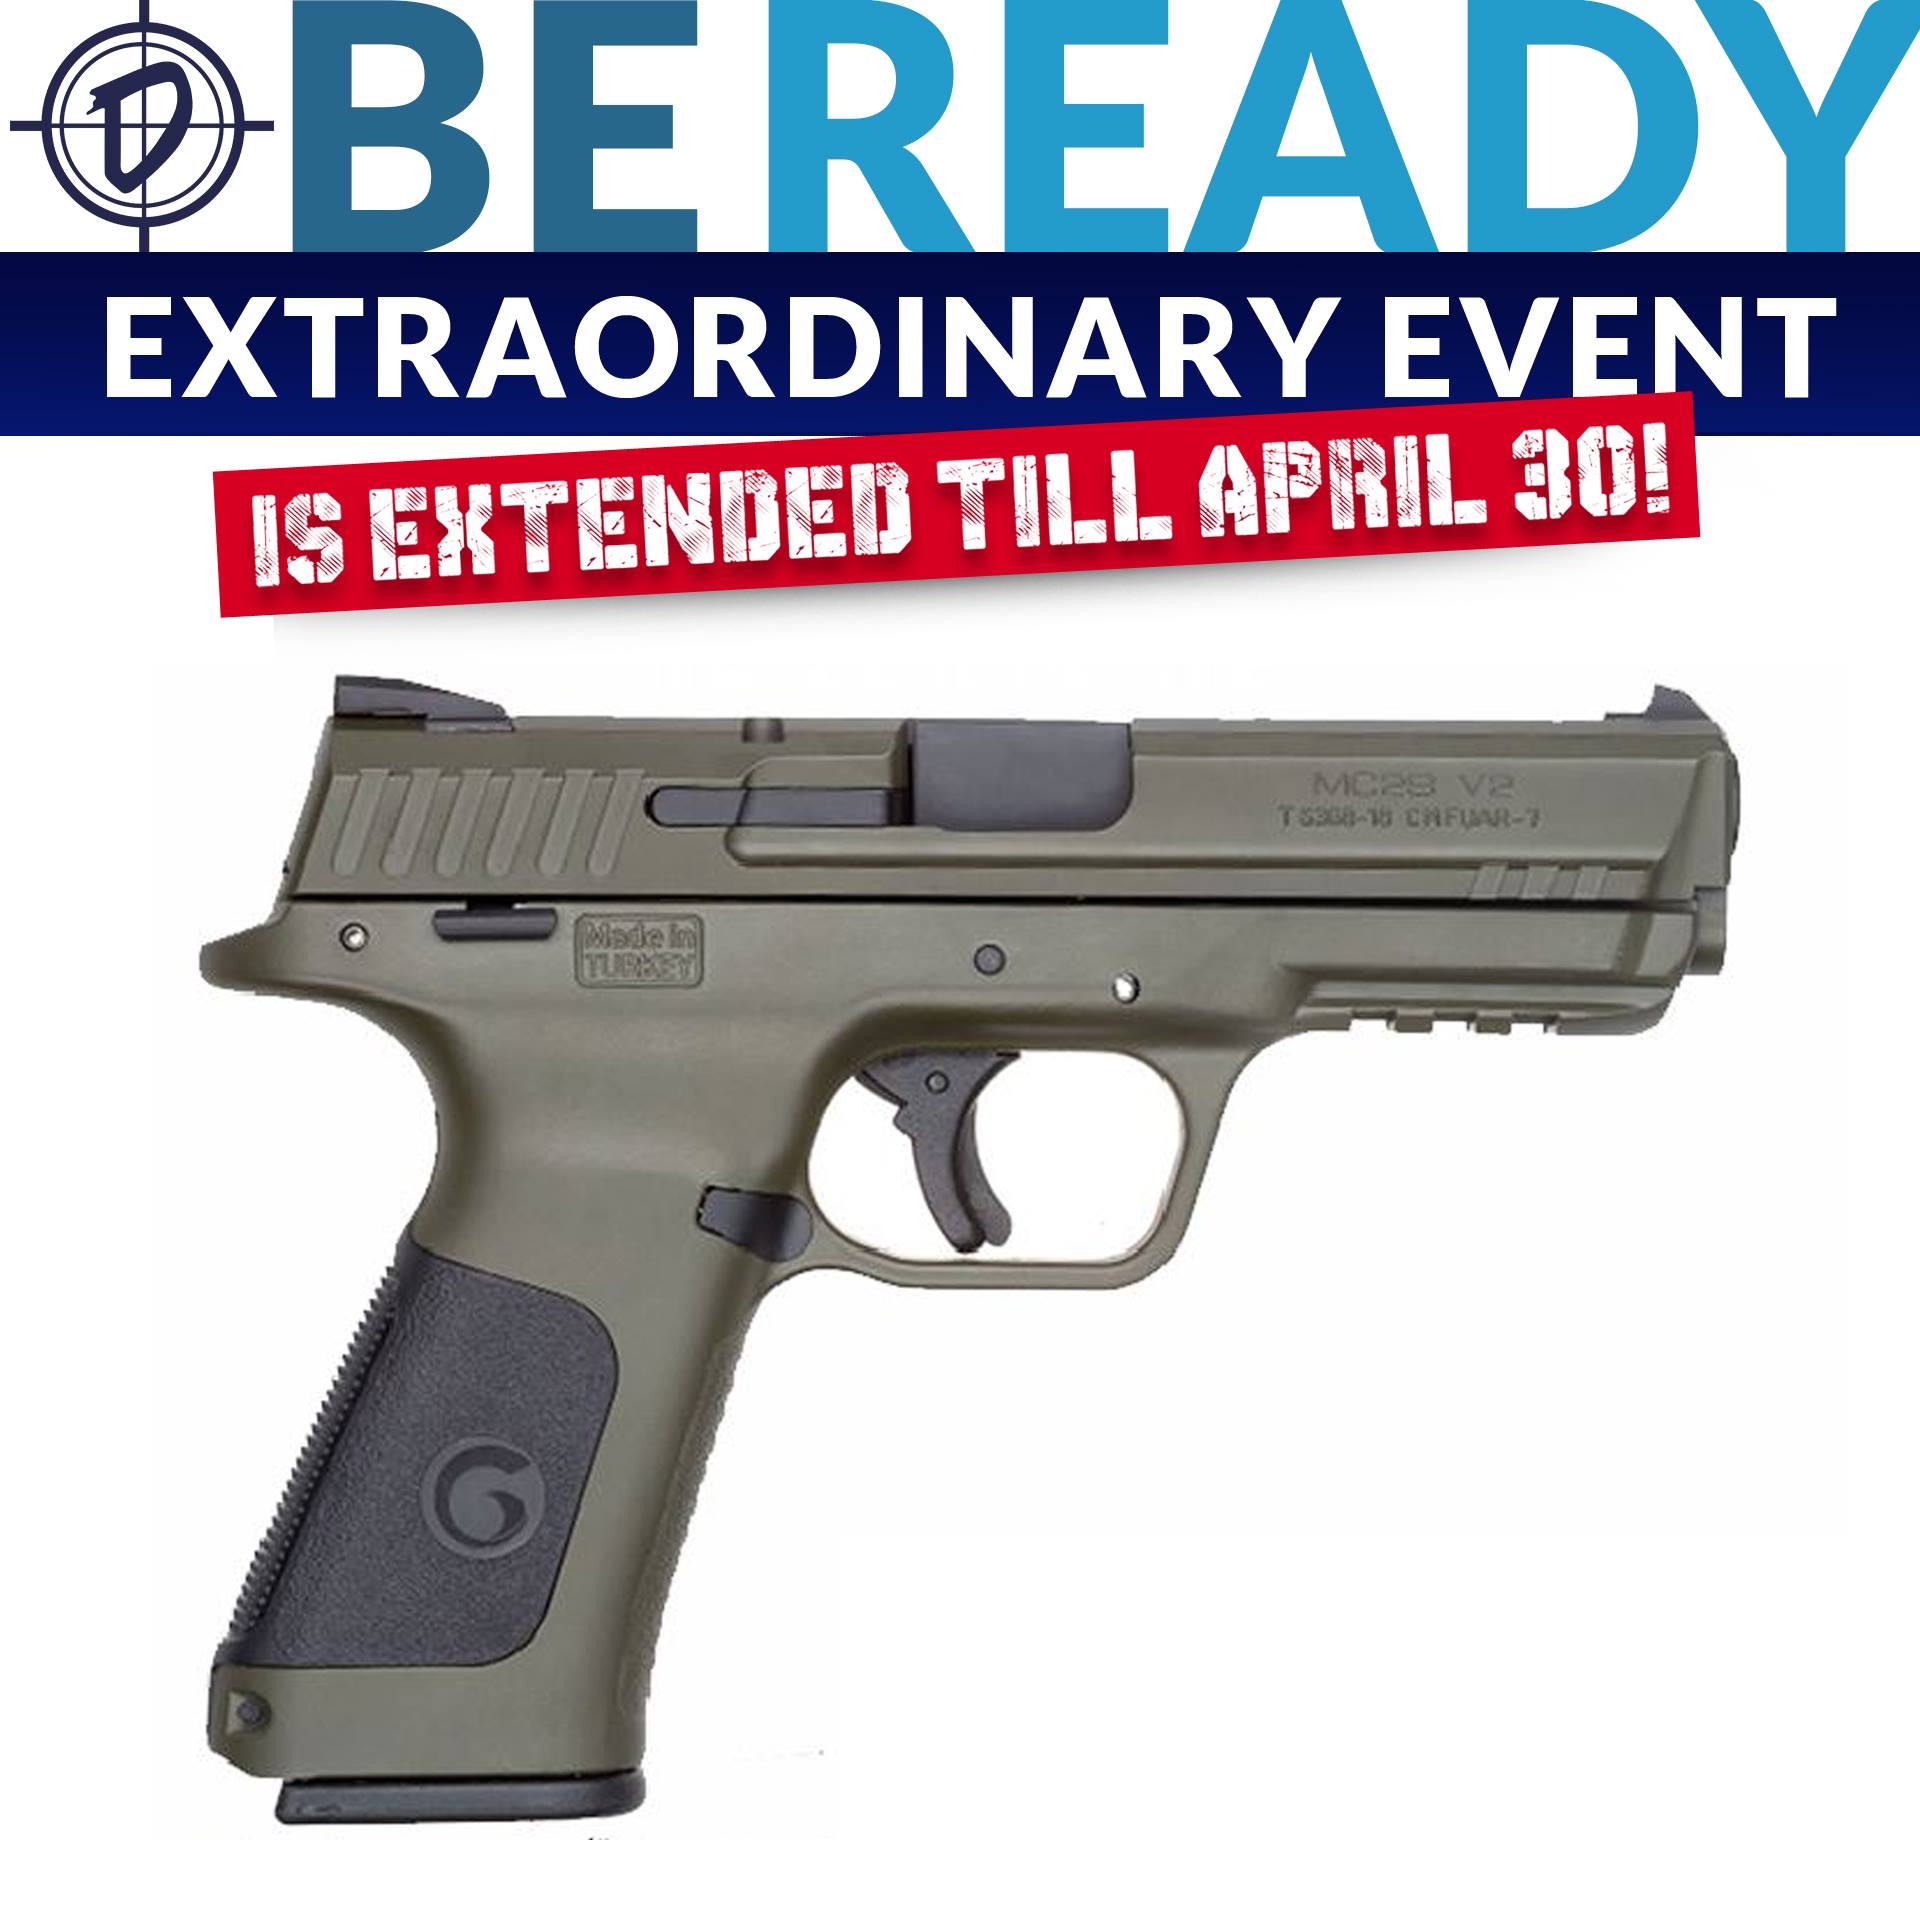 Be Ready for the Extended Extraordinary Sale Event